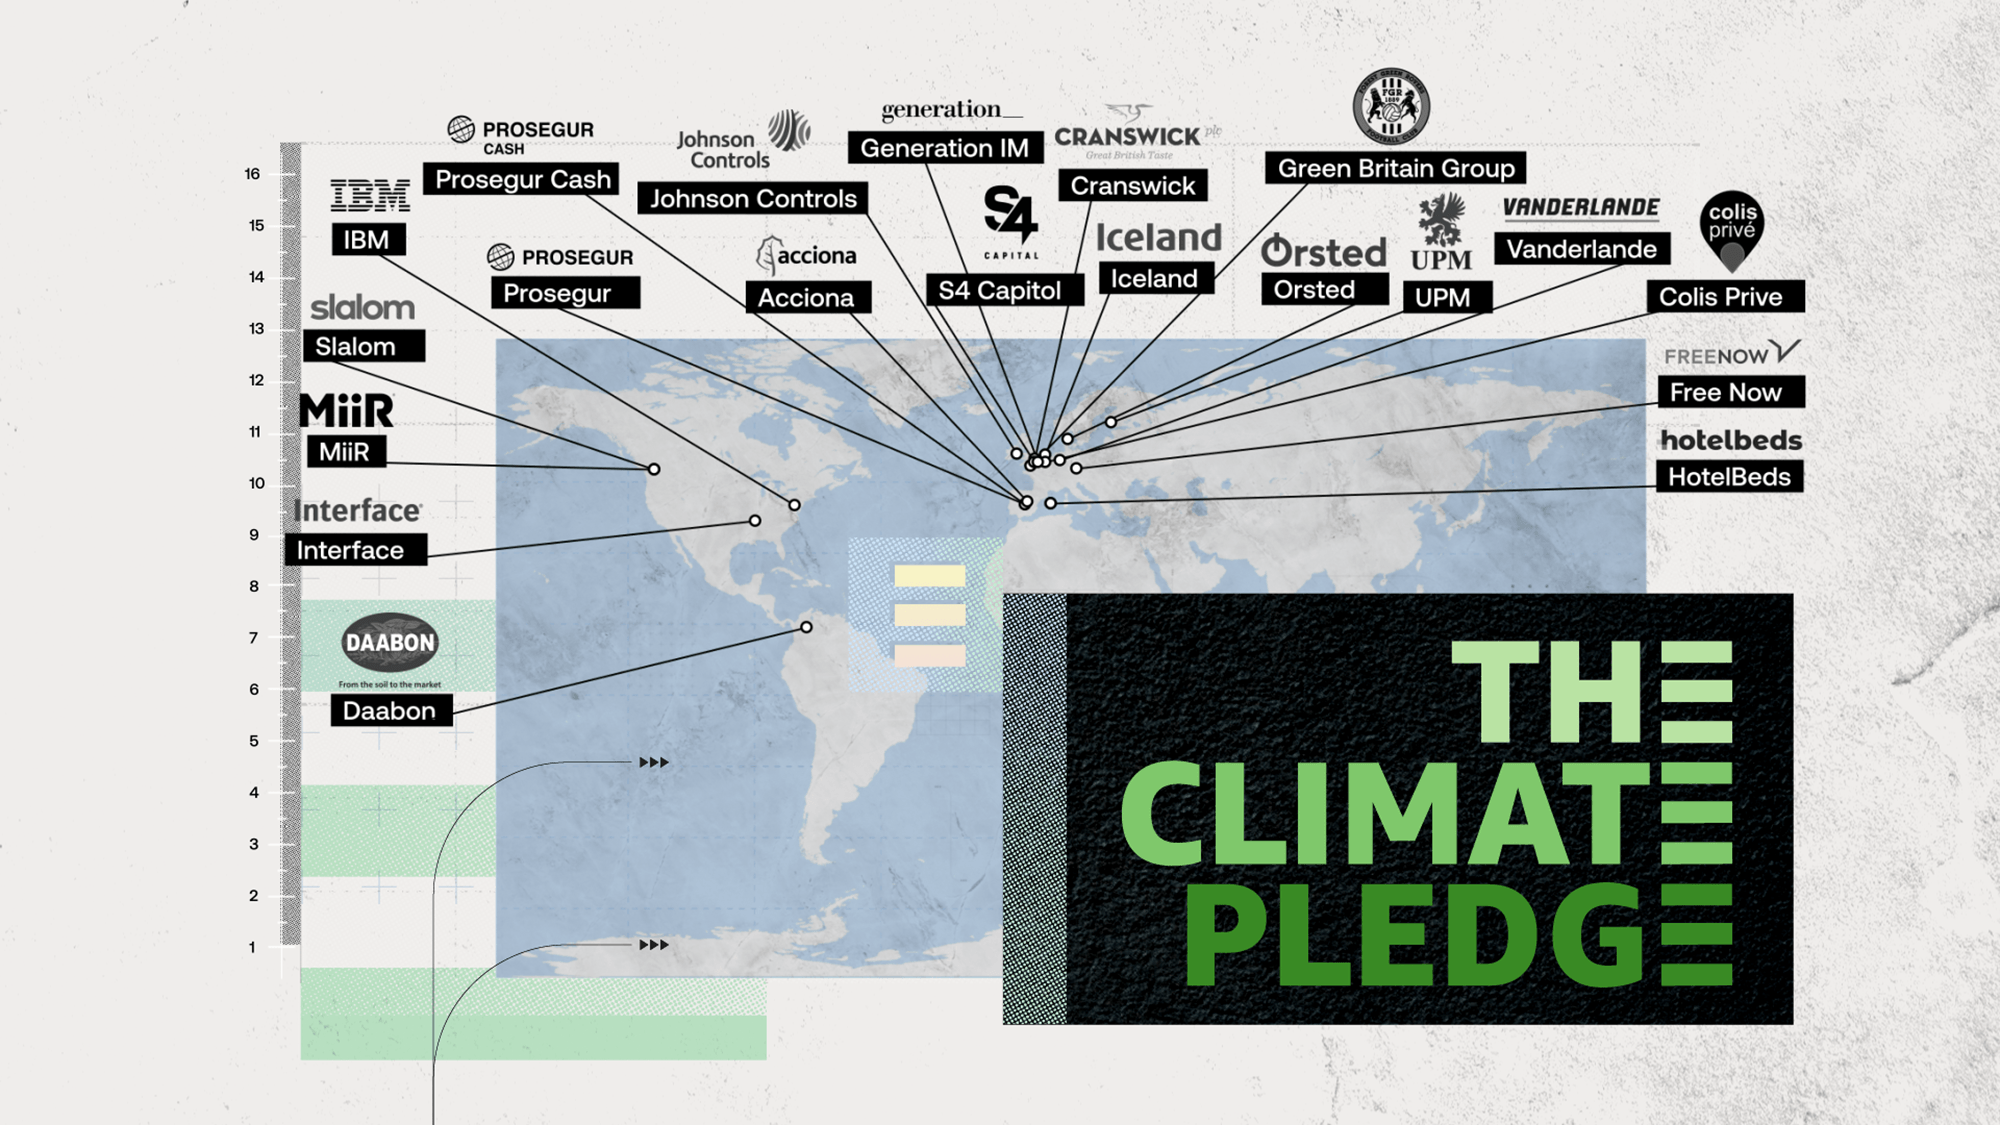 An illustration that shows the location of the newest signatories to The Climate Pledge, includign Daabon, Interface, Miir, Slalom, IBM, Prosegur, Prosegur Cash, Johnson Controls, Acciona, Generation IM, S4 Capitol, Cranswick, Iceland, Green Britain Group, Orsted, UPM, Vanderlande, Colis Prive, Free Now, and HotelBeds